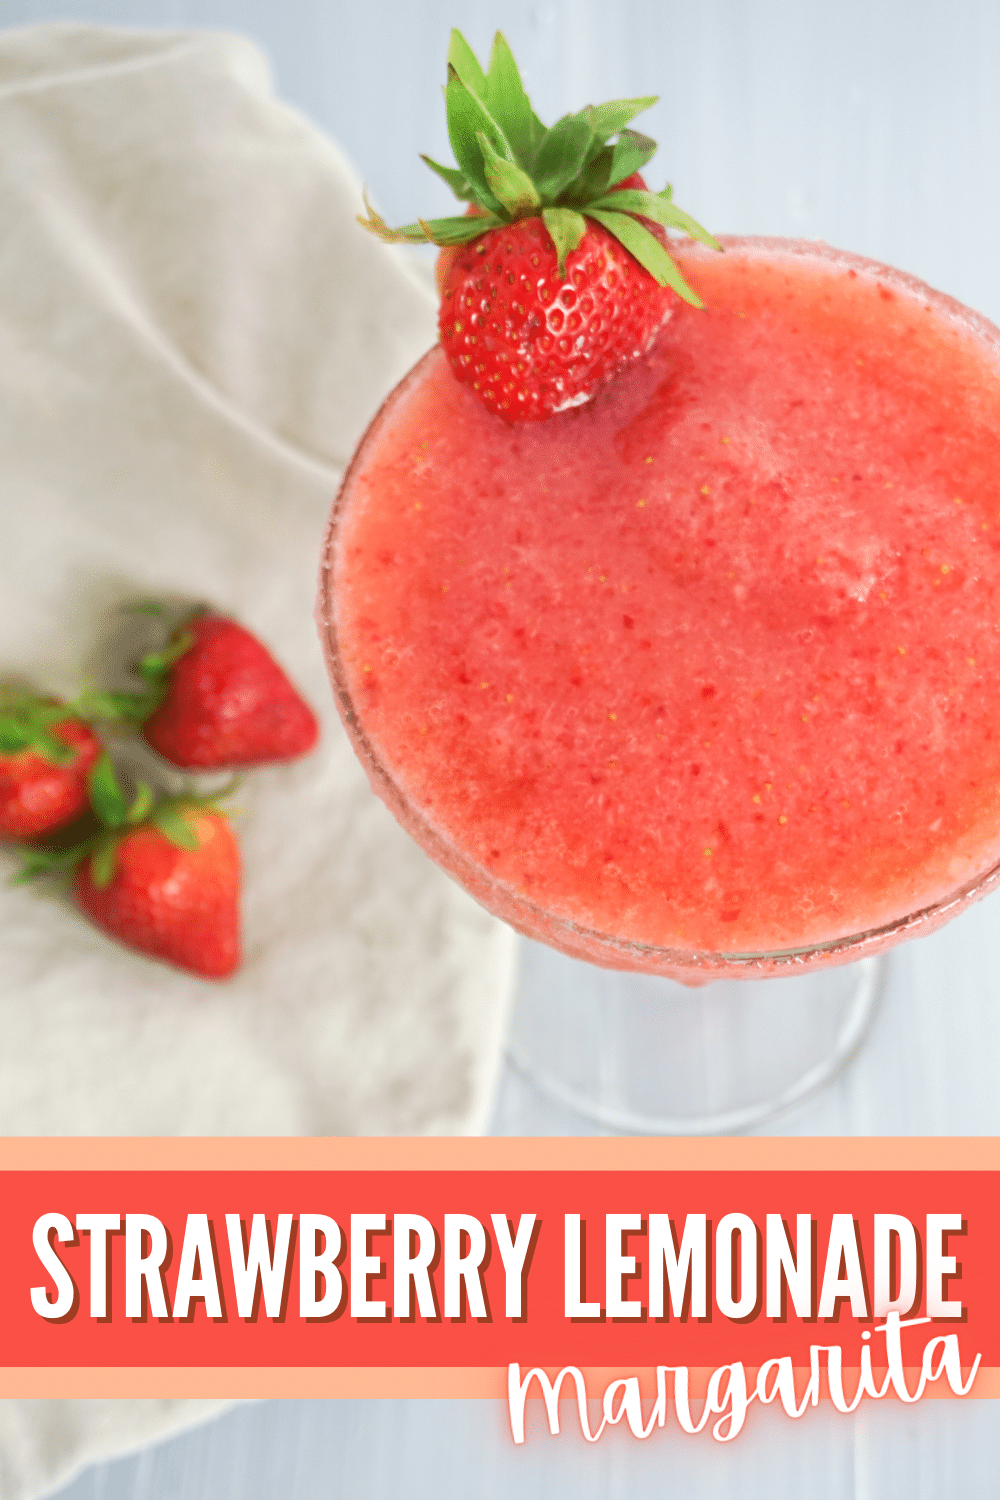 This Strawberry Lemonade Margarita is a refreshing and delicious twist on the classic margarita. It will tantalize your taste buds. #lemonademargarita #strawberrylemonademargarita #margaritas #margaritarecipes #pinklemonademargarita via @wondermomwannab